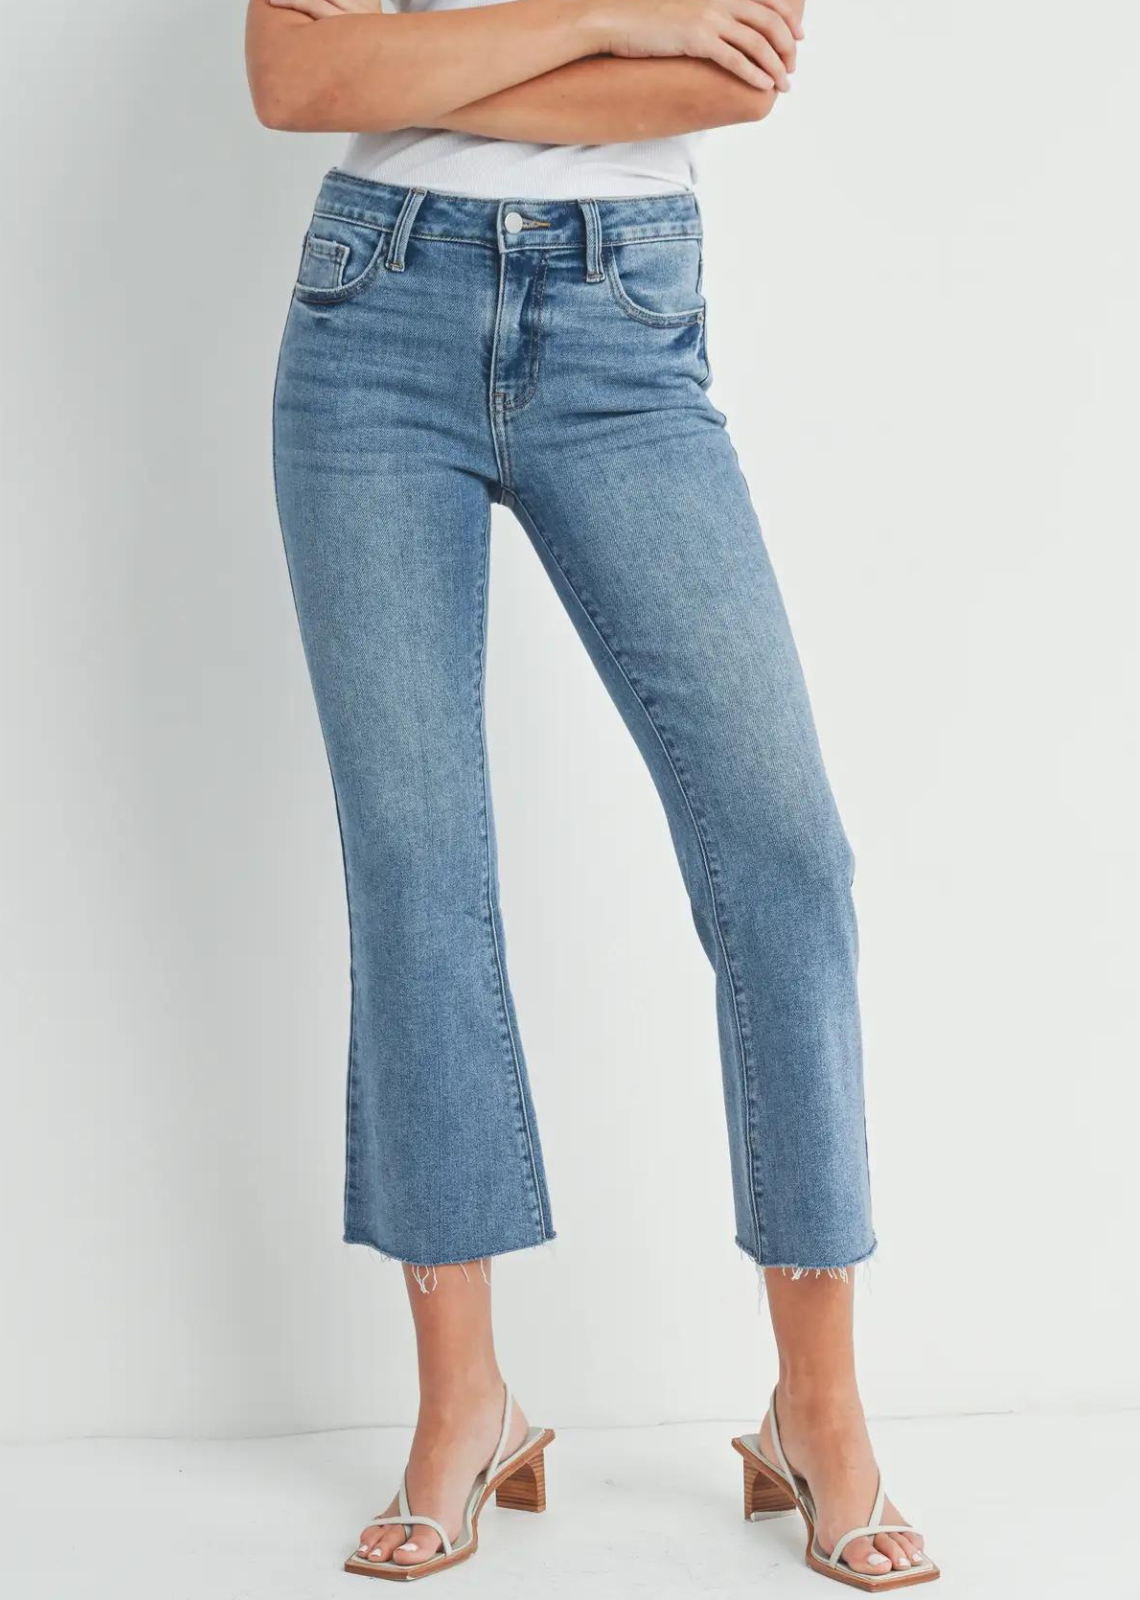 Just Black Stretch Cropped Flare. <p><span>Take a break in this comfortable flare jean that’s just a touch slimmer through the legs. A high-rise waist and subtle distressing around the hems make this the perfect pair for leisurely strolls or long lunches.